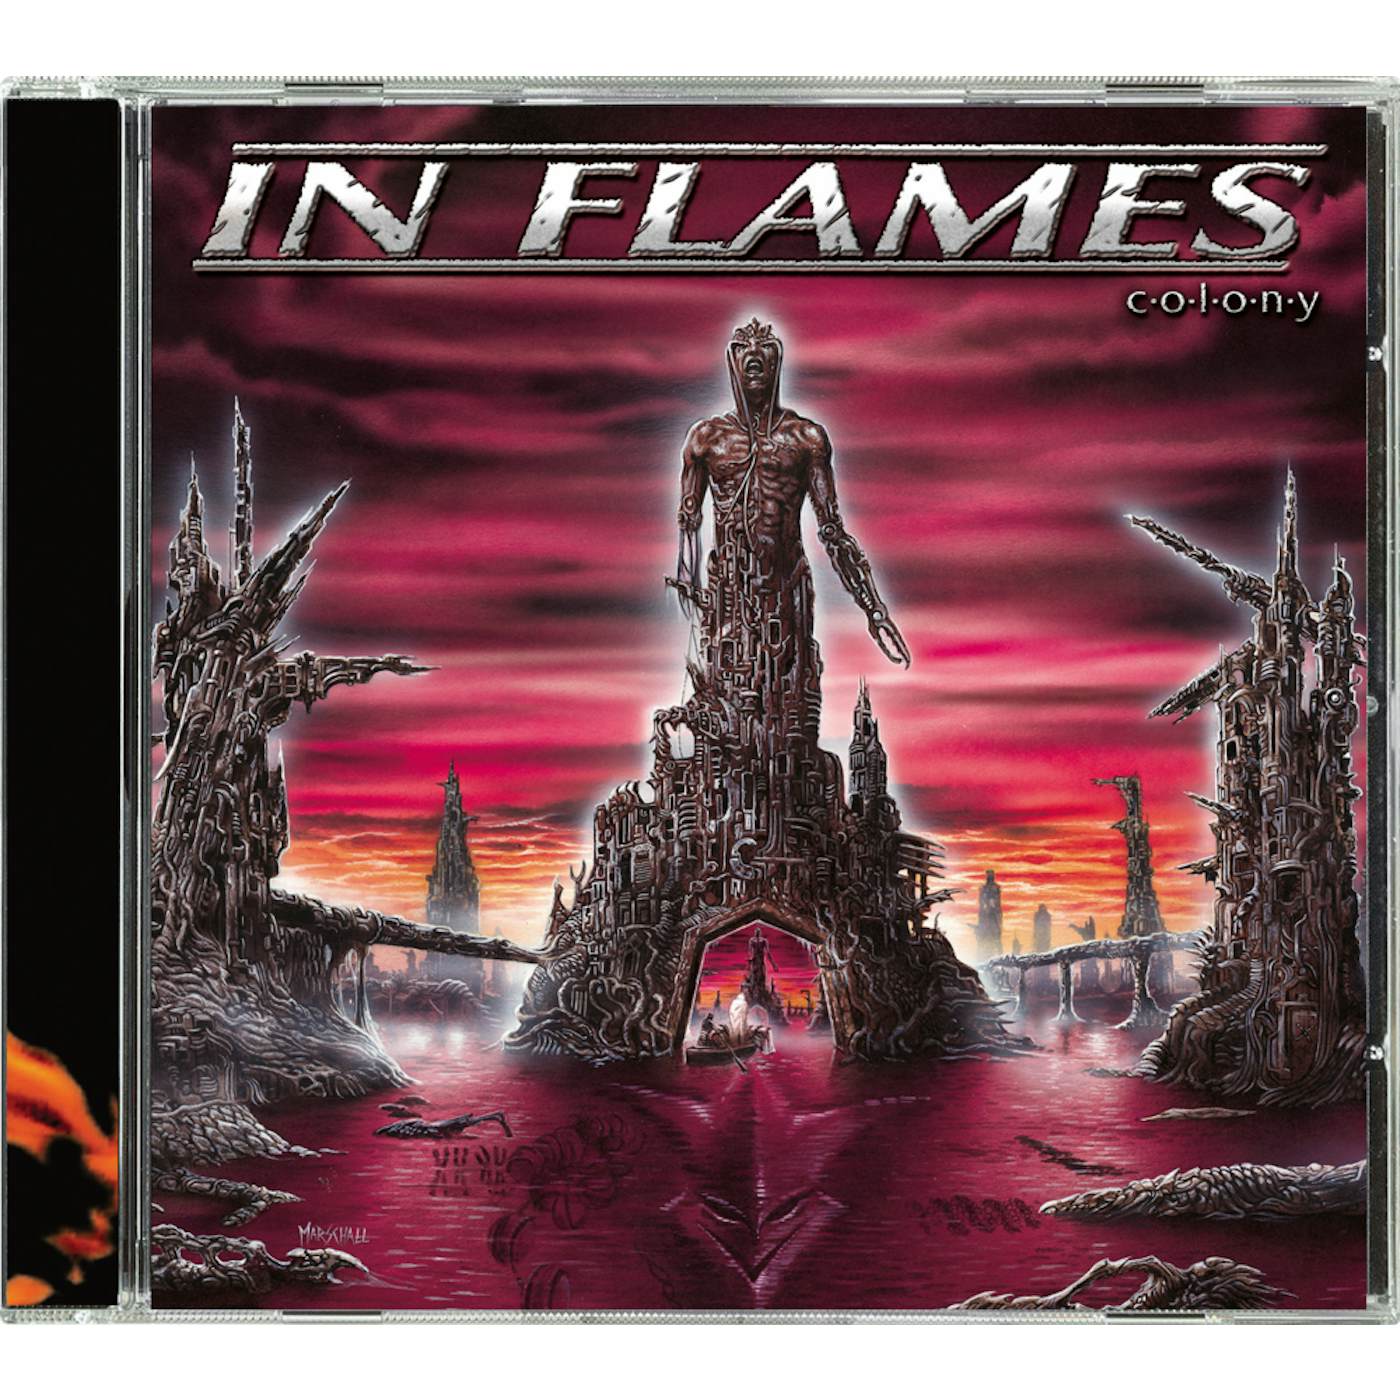 In Flames "Colony" CD